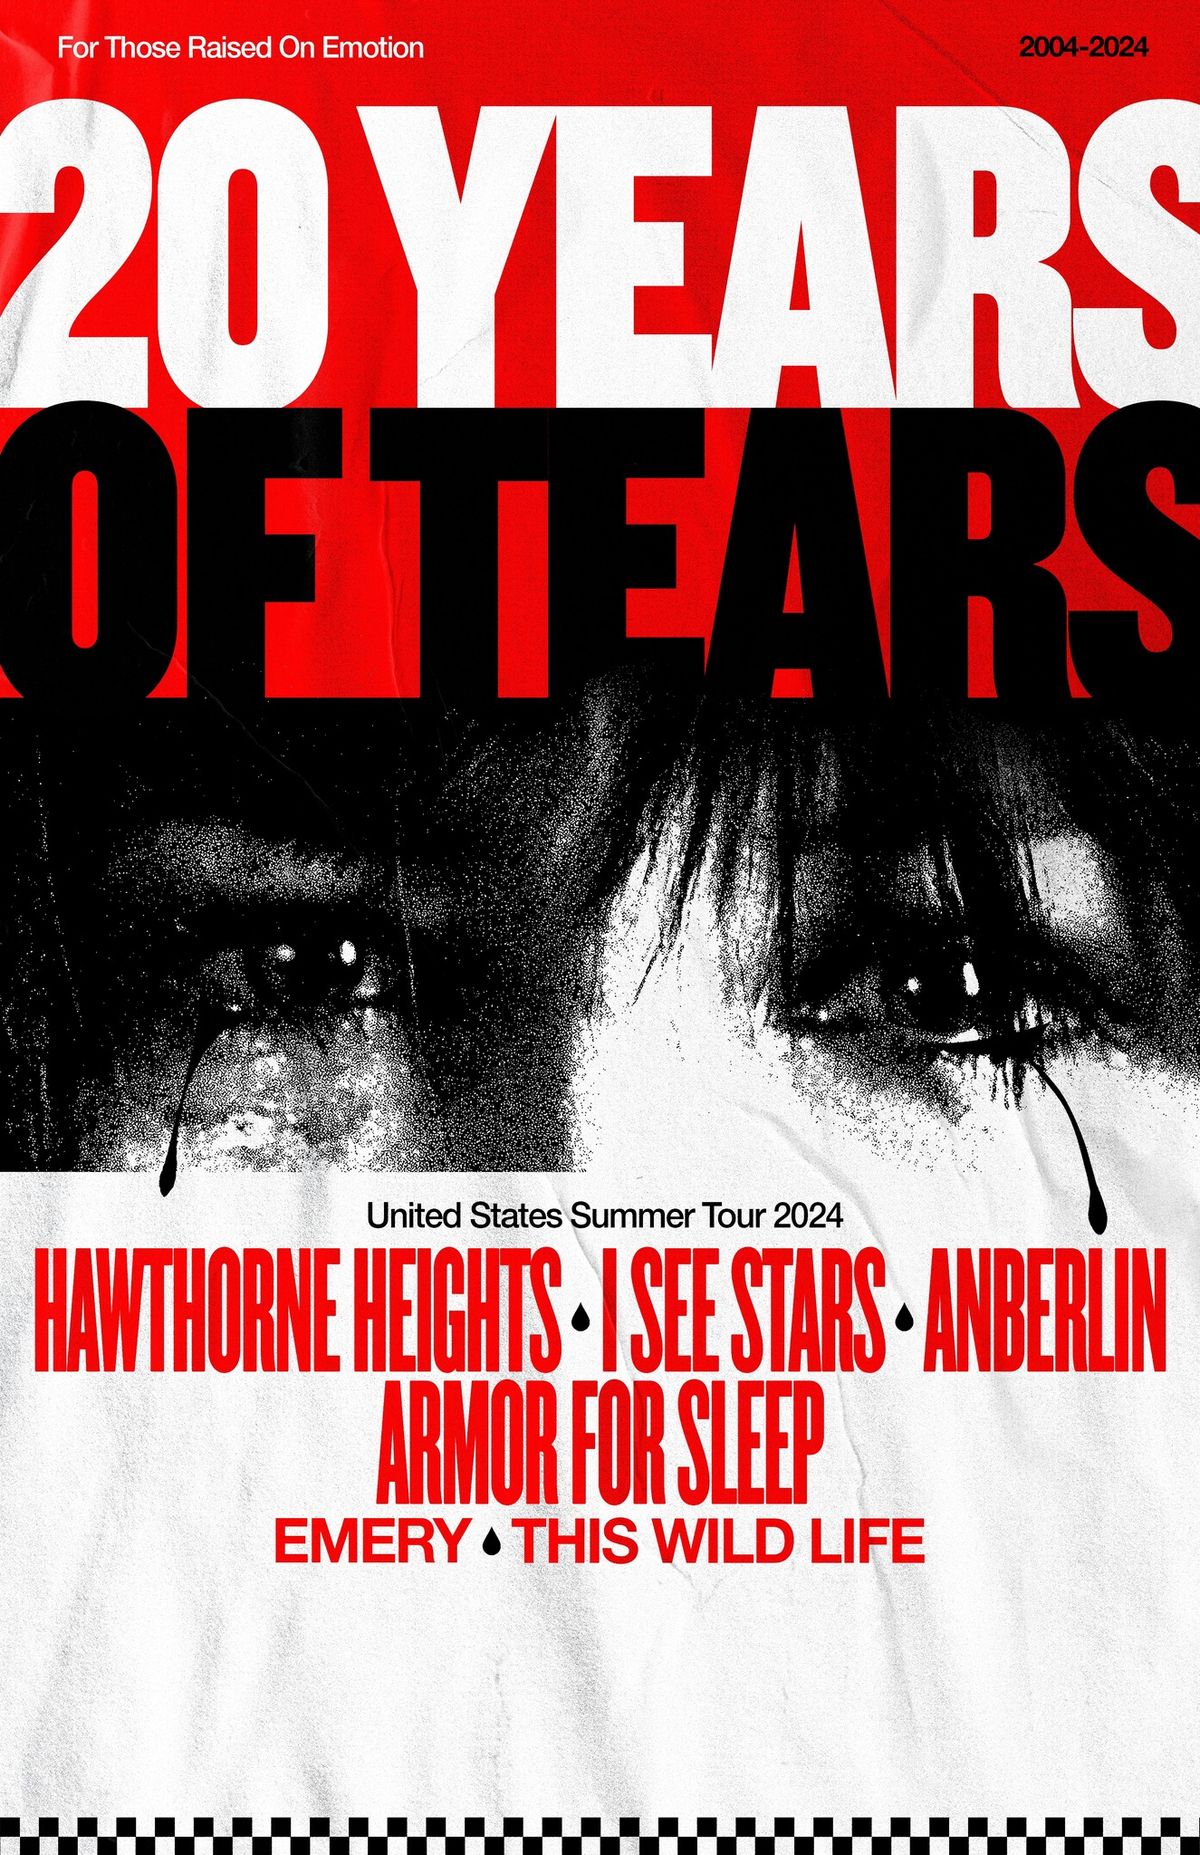 Hawthorne Heights: 20 Years of Tears at The Foundry